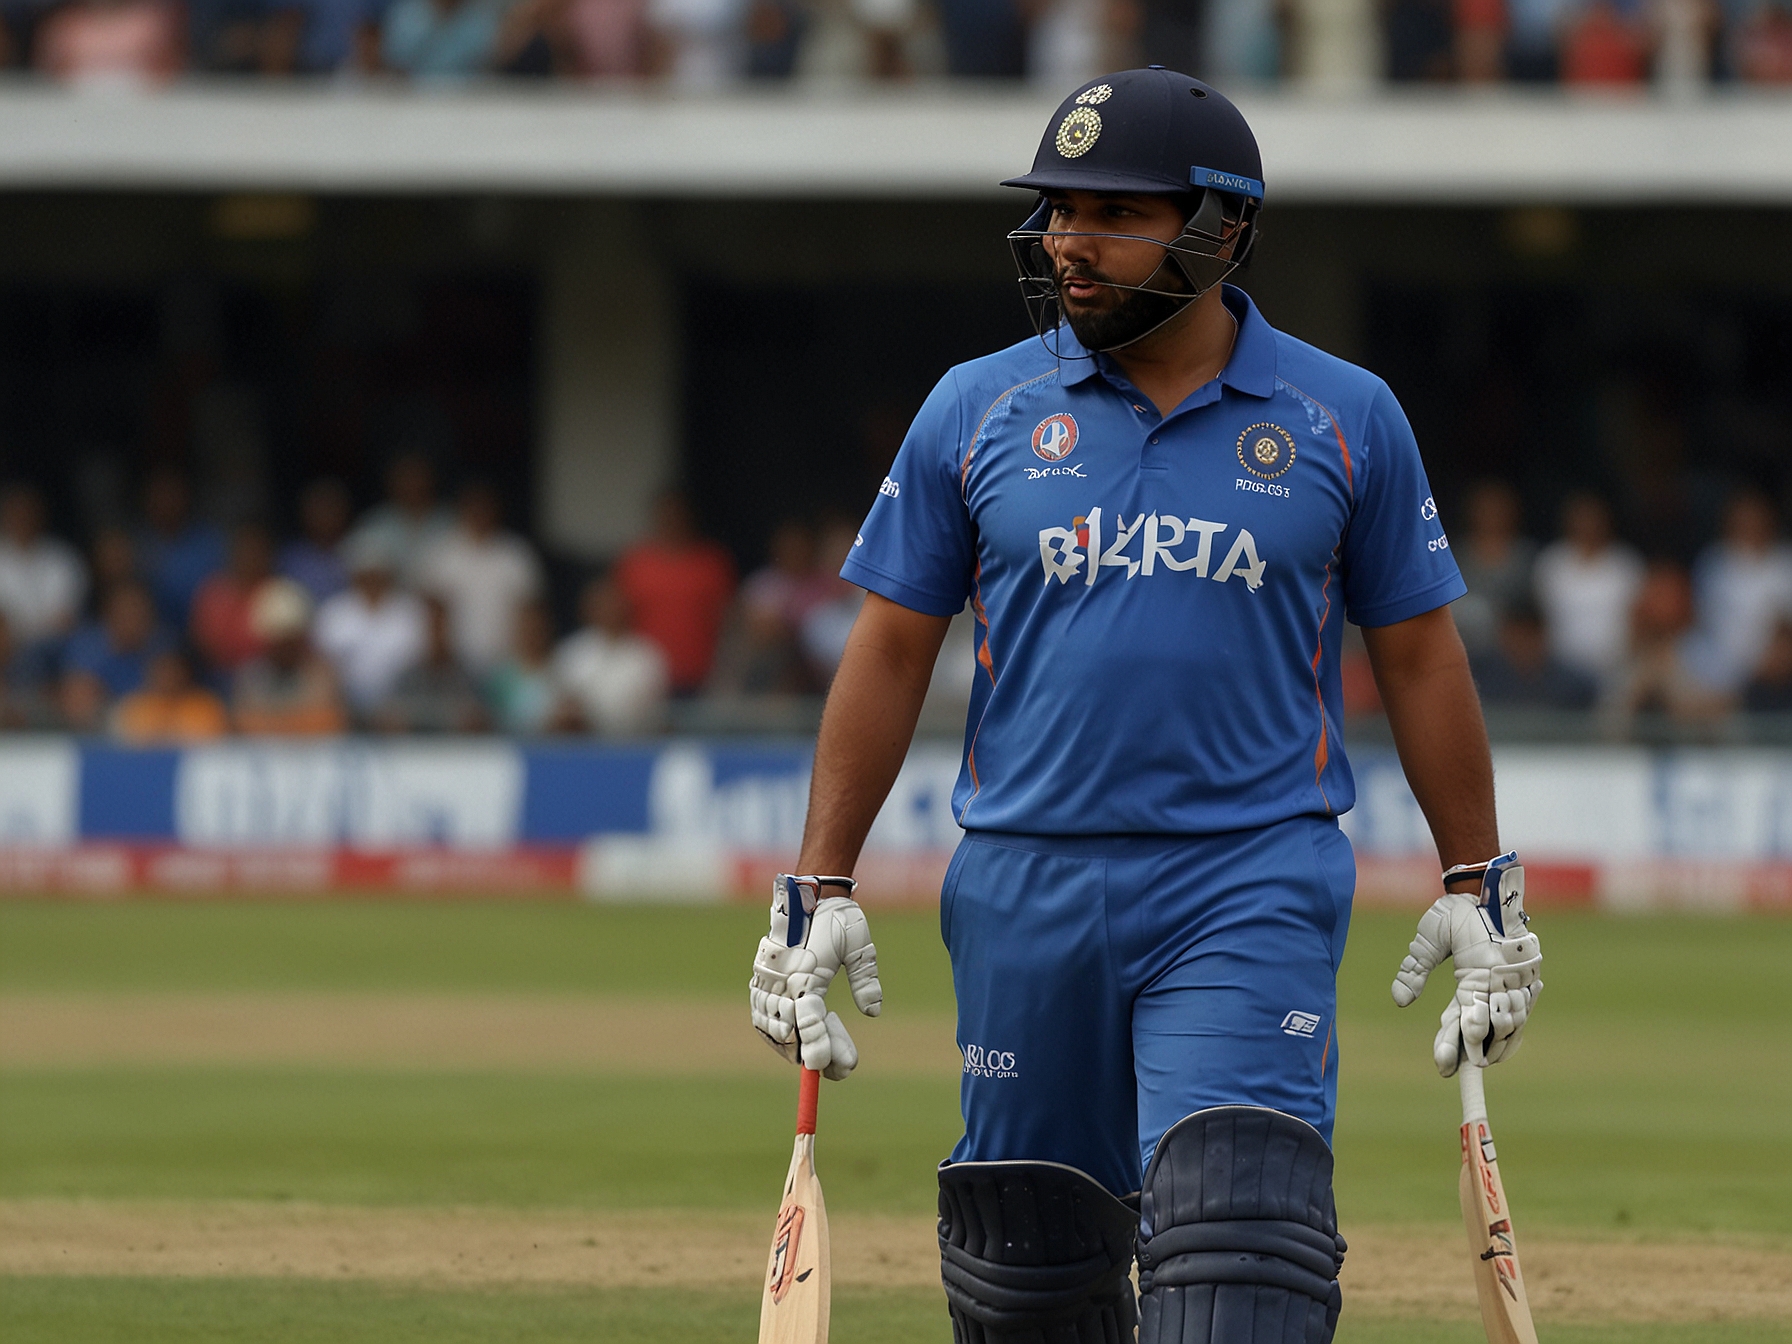 Rohit Sharma walks back to the pavilion after being dismissed by a left-arm pacer, highlighting his ongoing struggle against such bowlers.